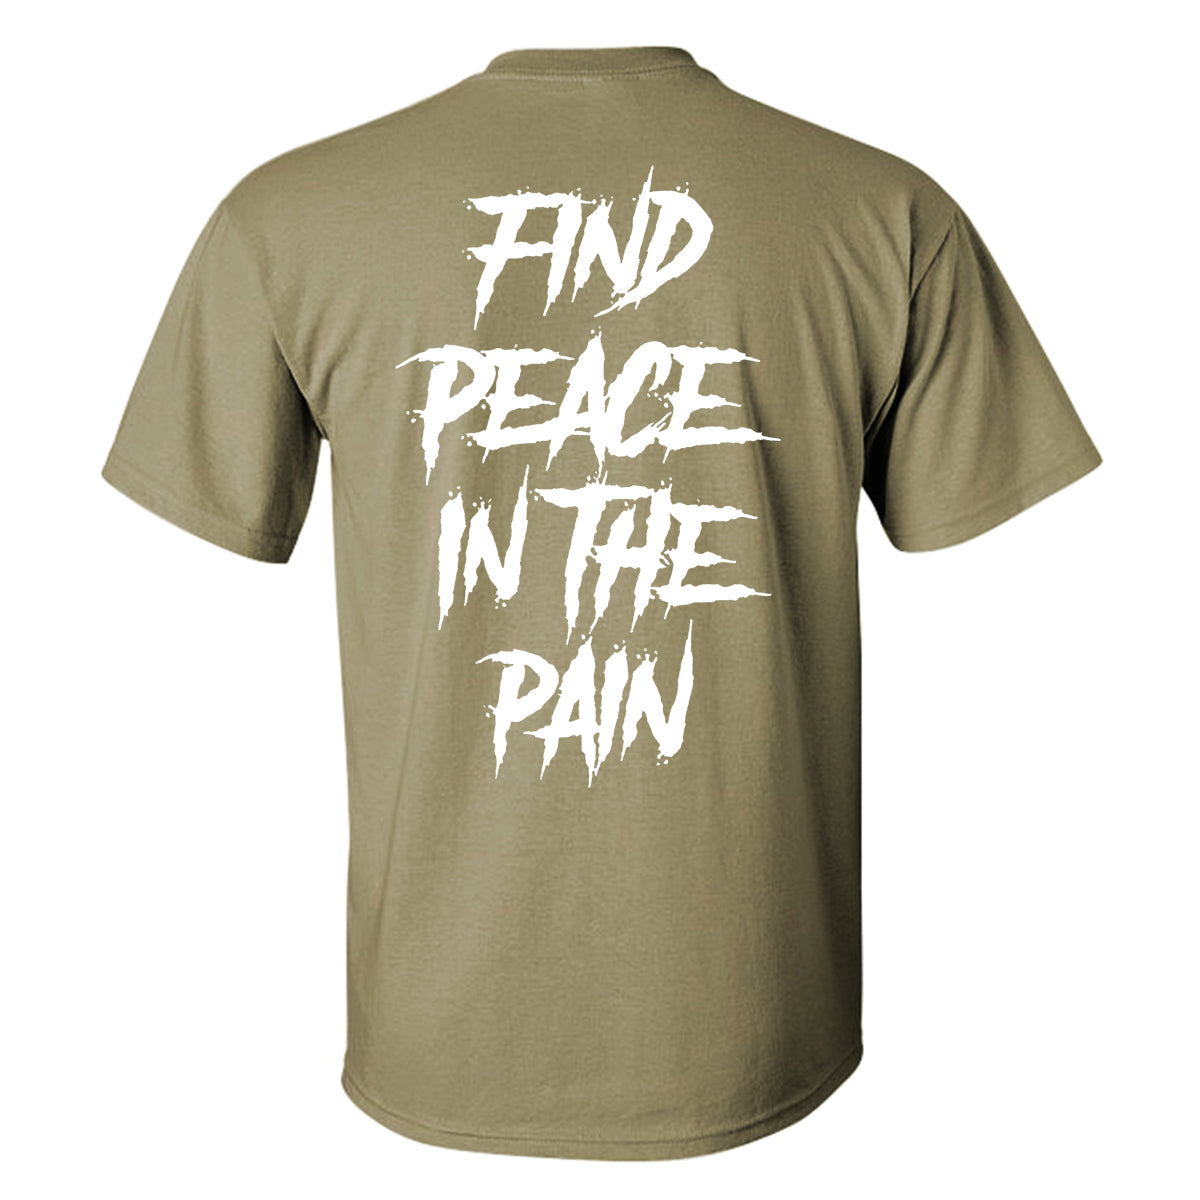 Find peace in the pain Printed T-shirt